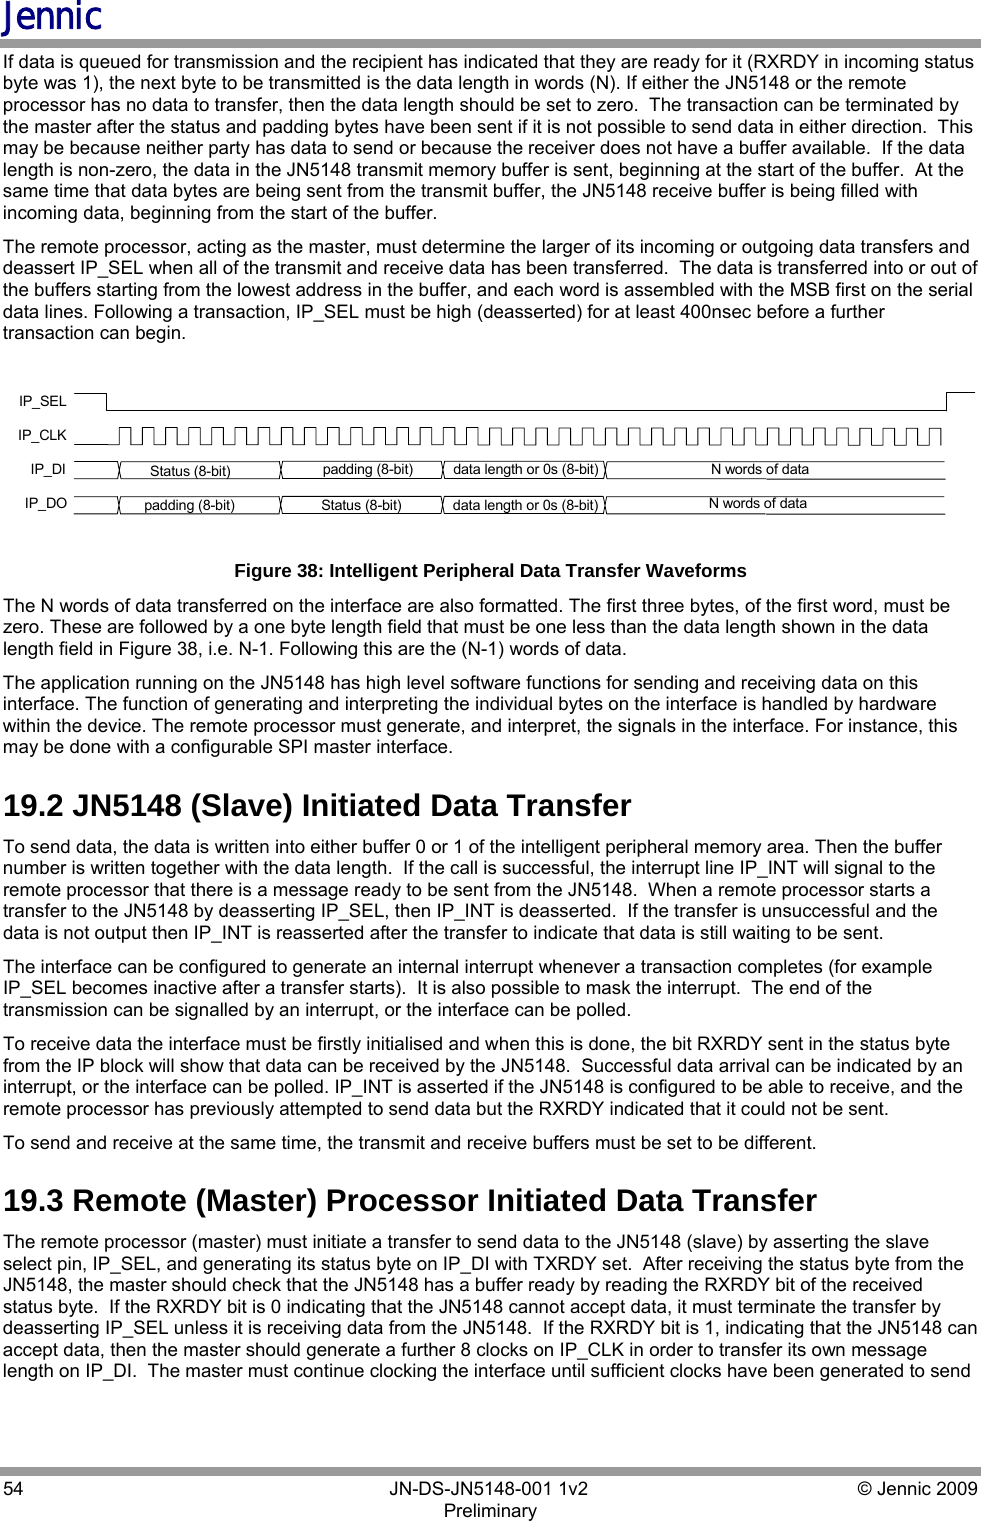 Jennic 54        JN-DS-JN5148-001 1v2  © Jennic 2009 Preliminary  If data is queued for transmission and the recipient has indicated that they are ready for it (RXRDY in incoming status byte was 1), the next byte to be transmitted is the data length in words (N). If either the JN5148 or the remote processor has no data to transfer, then the data length should be set to zero.  The transaction can be terminated by the master after the status and padding bytes have been sent if it is not possible to send data in either direction.  This may be because neither party has data to send or because the receiver does not have a buffer available.  If the data length is non-zero, the data in the JN5148 transmit memory buffer is sent, beginning at the start of the buffer.  At the same time that data bytes are being sent from the transmit buffer, the JN5148 receive buffer is being filled with incoming data, beginning from the start of the buffer. The remote processor, acting as the master, must determine the larger of its incoming or outgoing data transfers and deassert IP_SEL when all of the transmit and receive data has been transferred.  The data is transferred into or out of the buffers starting from the lowest address in the buffer, and each word is assembled with the MSB first on the serial data lines. Following a transaction, IP_SEL must be high (deasserted) for at least 400nsec before a further transaction can begin.  IP_SELIP_CLKIP_DI Status (8-bit)  N words of dataIP_DOdata length or 0s (8-bit)Status (8-bit) N words of datadata length or 0s (8-bit)padding (8-bit)padding (8-bit) Figure 38: Intelligent Peripheral Data Transfer Waveforms The N words of data transferred on the interface are also formatted. The first three bytes, of the first word, must be zero. These are followed by a one byte length field that must be one less than the data length shown in the data length field in Figure 38, i.e. N-1. Following this are the (N-1) words of data. The application running on the JN5148 has high level software functions for sending and receiving data on this interface. The function of generating and interpreting the individual bytes on the interface is handled by hardware within the device. The remote processor must generate, and interpret, the signals in the interface. For instance, this may be done with a configurable SPI master interface. 19.2 JN5148 (Slave) Initiated Data Transfer To send data, the data is written into either buffer 0 or 1 of the intelligent peripheral memory area. Then the buffer number is written together with the data length.  If the call is successful, the interrupt line IP_INT will signal to the remote processor that there is a message ready to be sent from the JN5148.  When a remote processor starts a transfer to the JN5148 by deasserting IP_SEL, then IP_INT is deasserted.  If the transfer is unsuccessful and the data is not output then IP_INT is reasserted after the transfer to indicate that data is still waiting to be sent. The interface can be configured to generate an internal interrupt whenever a transaction completes (for example IP_SEL becomes inactive after a transfer starts).  It is also possible to mask the interrupt.  The end of the transmission can be signalled by an interrupt, or the interface can be polled. To receive data the interface must be firstly initialised and when this is done, the bit RXRDY sent in the status byte from the IP block will show that data can be received by the JN5148.  Successful data arrival can be indicated by an interrupt, or the interface can be polled. IP_INT is asserted if the JN5148 is configured to be able to receive, and the remote processor has previously attempted to send data but the RXRDY indicated that it could not be sent. To send and receive at the same time, the transmit and receive buffers must be set to be different. 19.3 Remote (Master) Processor Initiated Data Transfer The remote processor (master) must initiate a transfer to send data to the JN5148 (slave) by asserting the slave select pin, IP_SEL, and generating its status byte on IP_DI with TXRDY set.  After receiving the status byte from the JN5148, the master should check that the JN5148 has a buffer ready by reading the RXRDY bit of the received status byte.  If the RXRDY bit is 0 indicating that the JN5148 cannot accept data, it must terminate the transfer by deasserting IP_SEL unless it is receiving data from the JN5148.  If the RXRDY bit is 1, indicating that the JN5148 can accept data, then the master should generate a further 8 clocks on IP_CLK in order to transfer its own message length on IP_DI.  The master must continue clocking the interface until sufficient clocks have been generated to send 